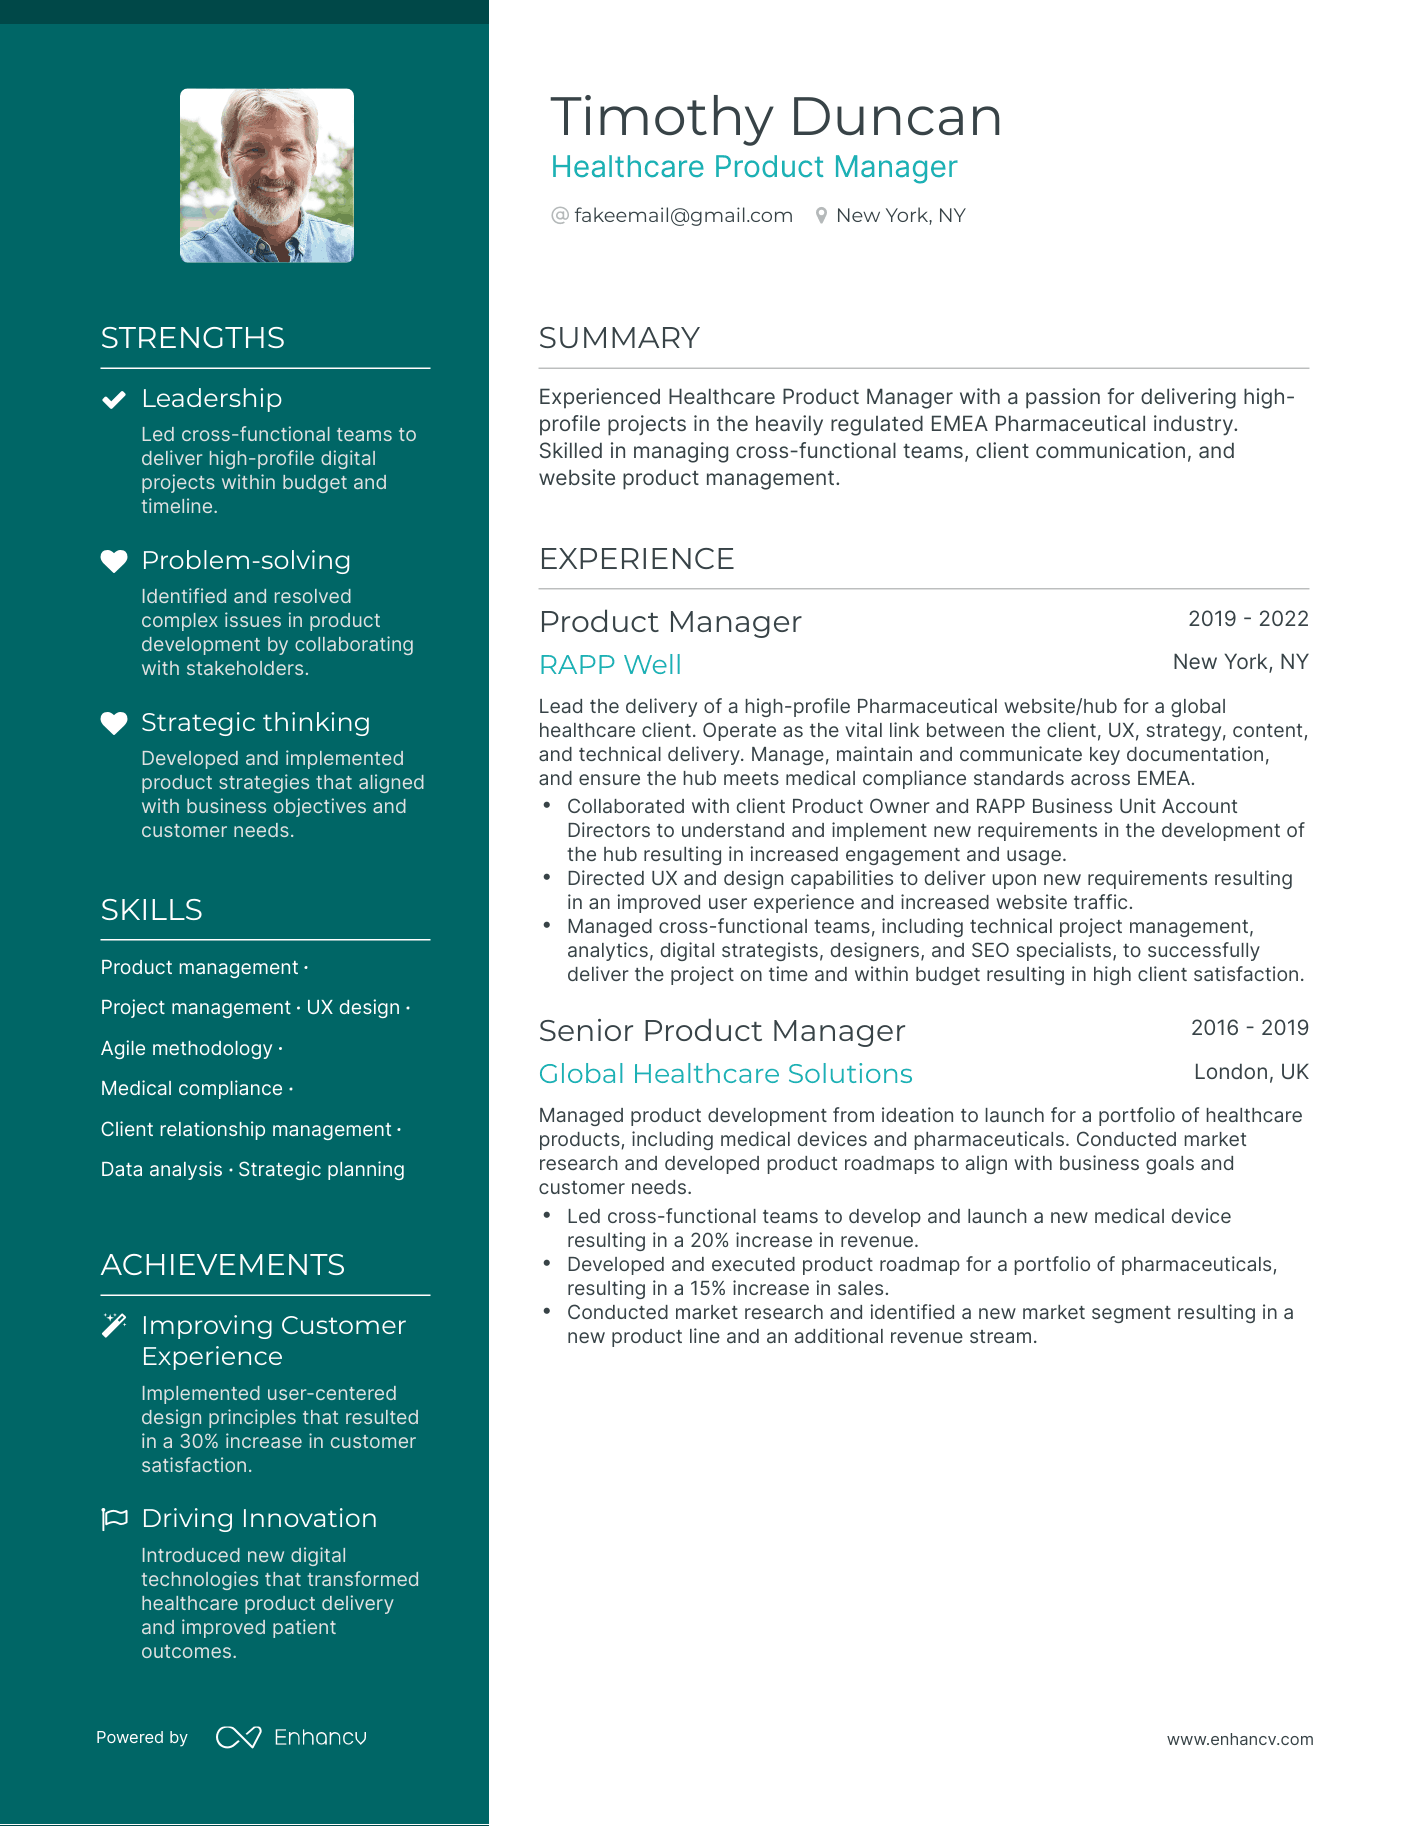 Polished Healthcare Product Manager Resume Template